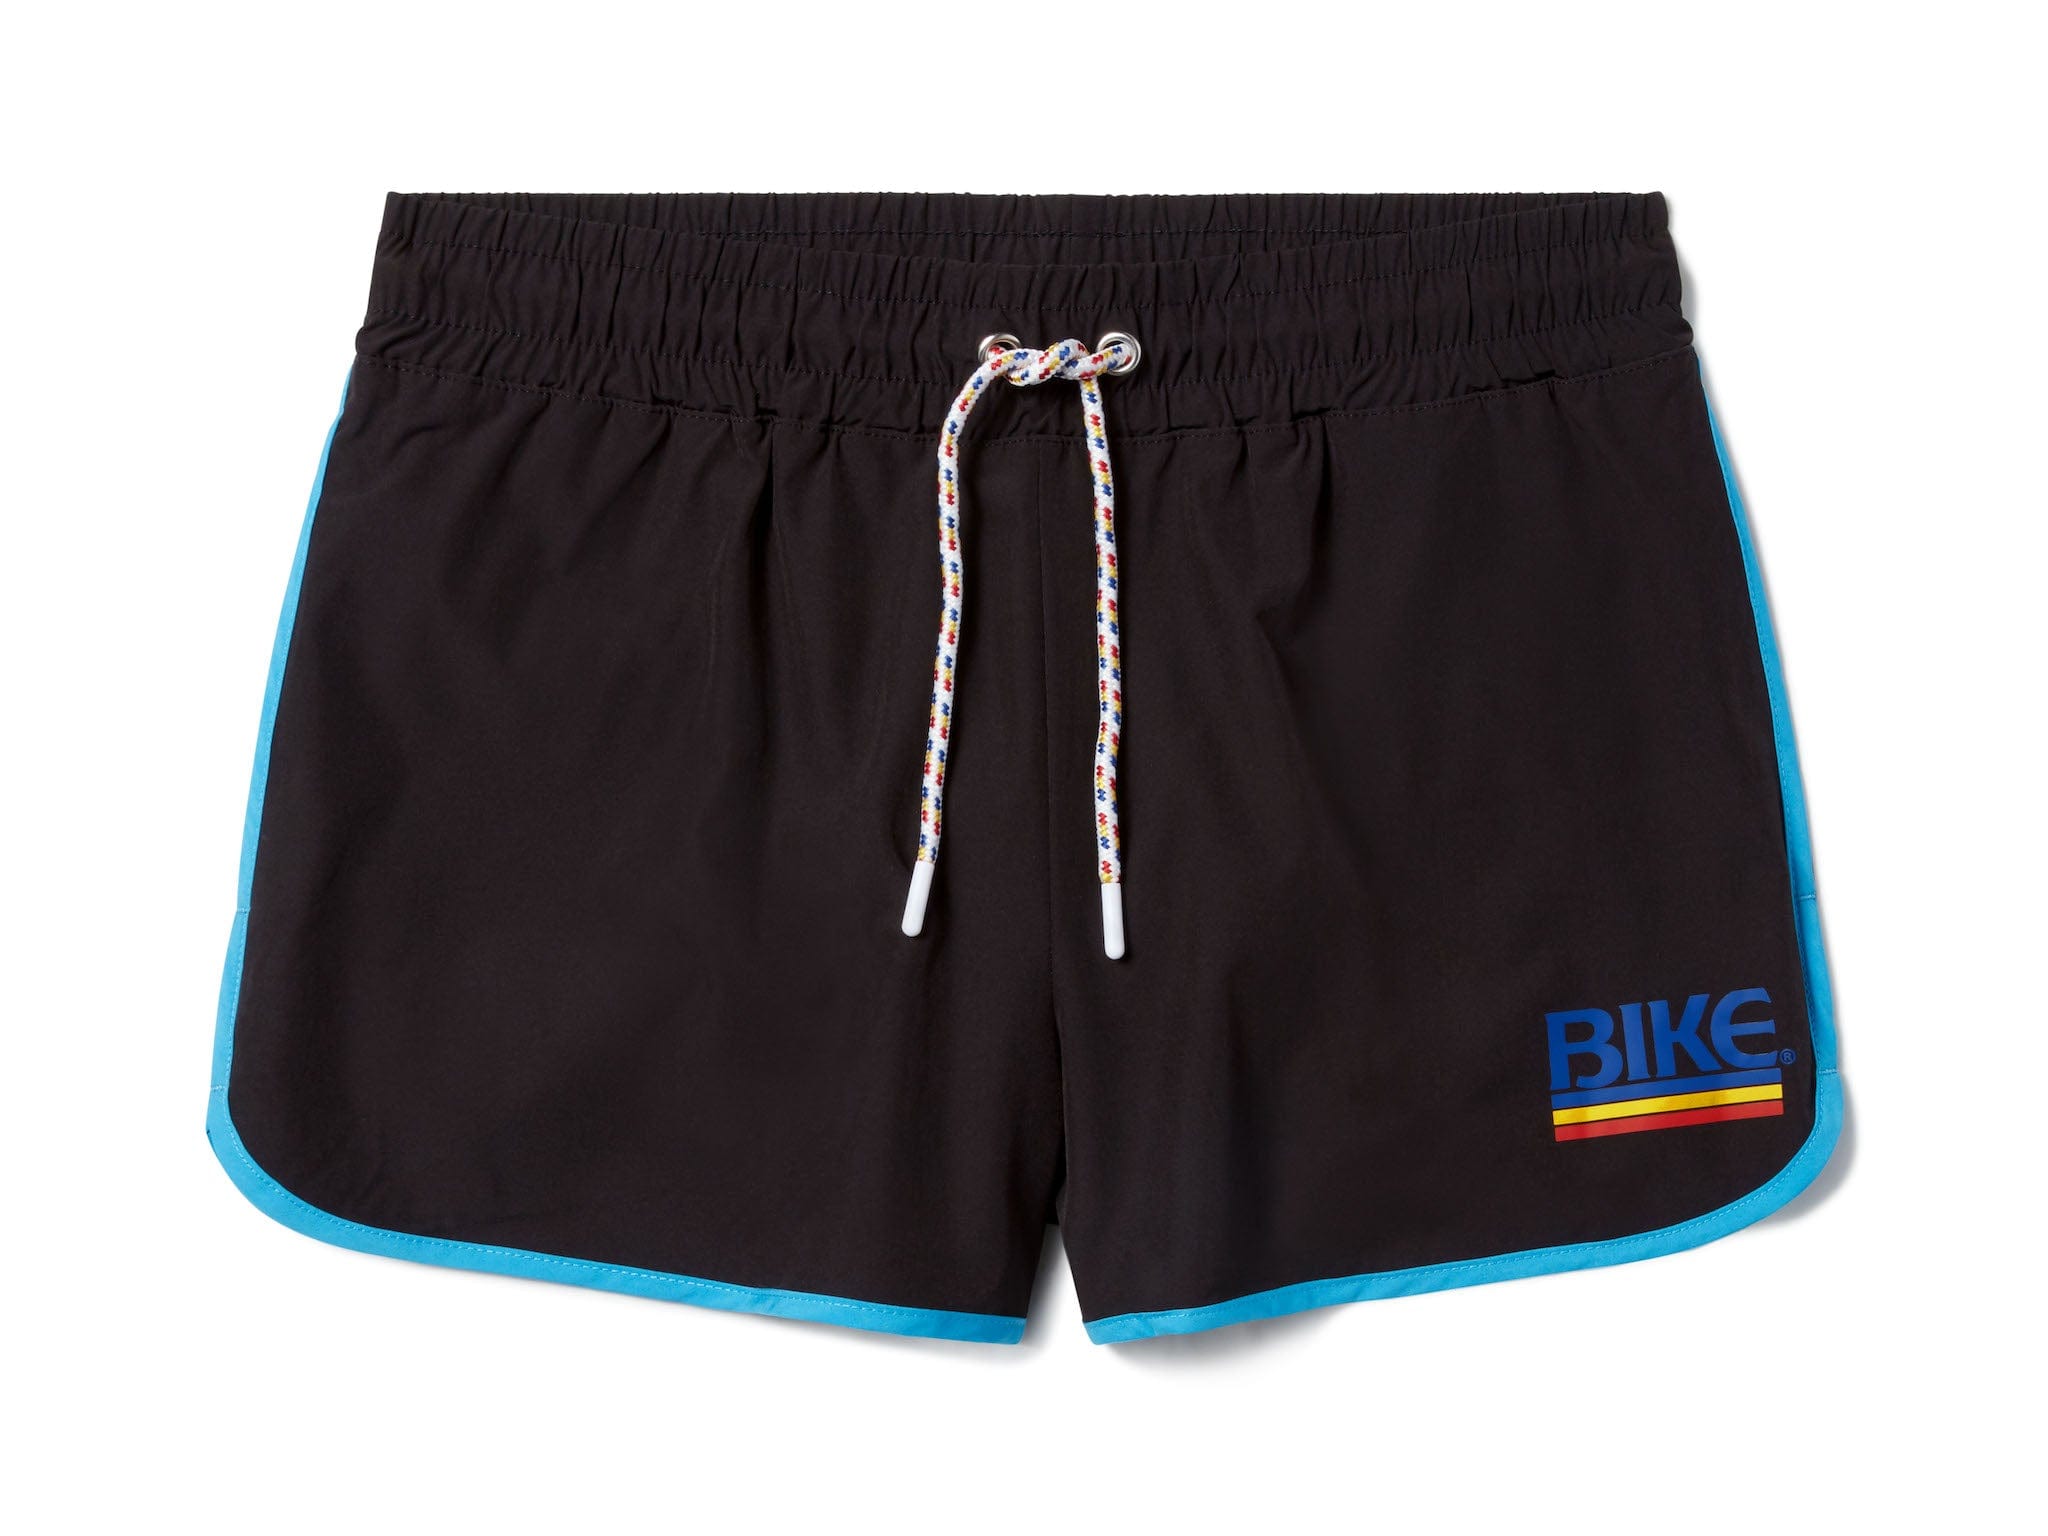 These Bike Shorts Are Trail-ready